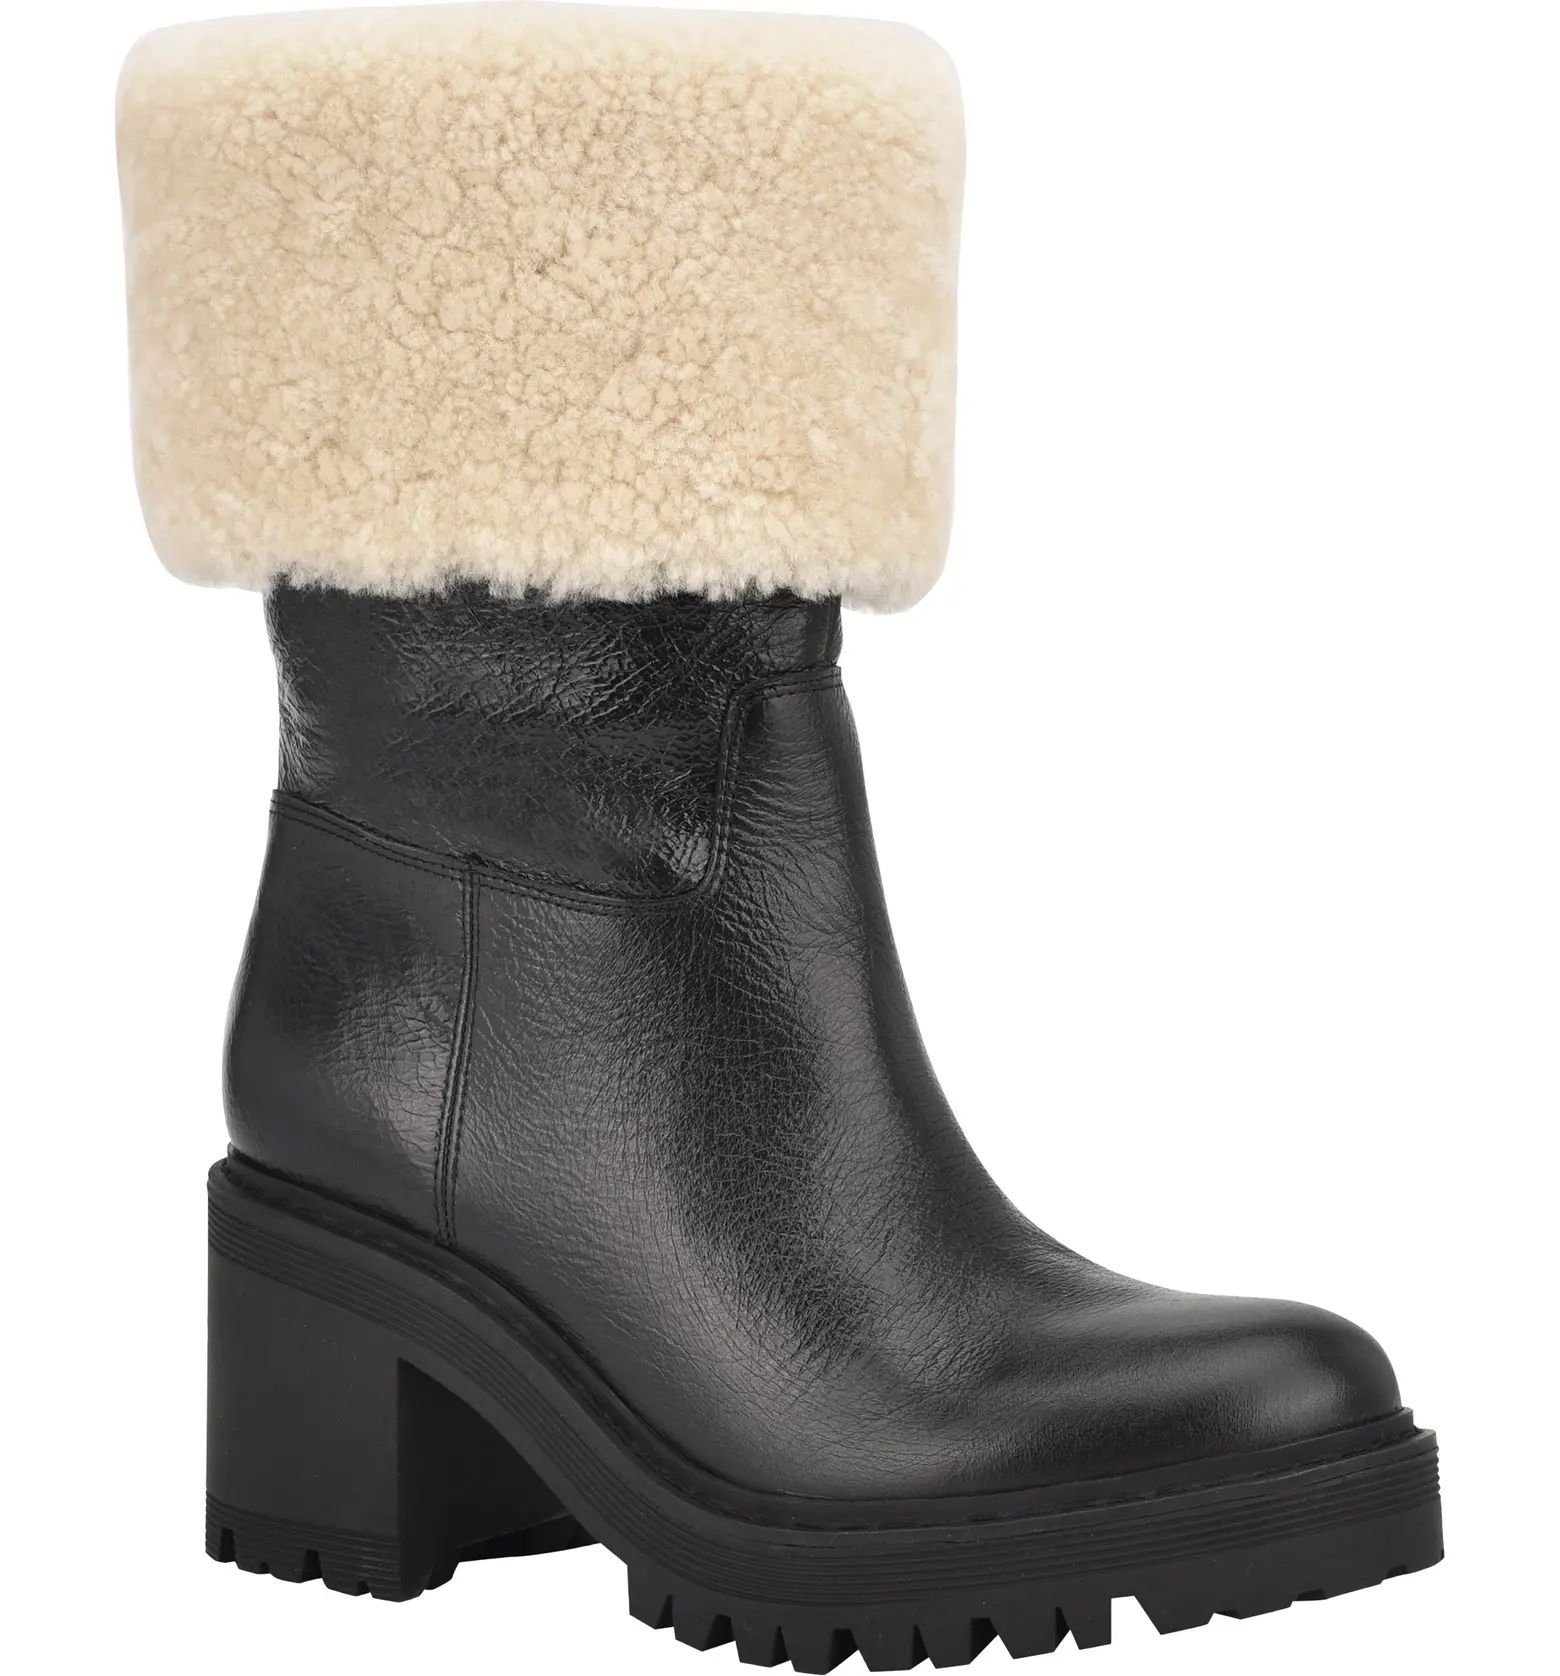 Willoe Boot with Genuine Shearling Trim | Nordstrom